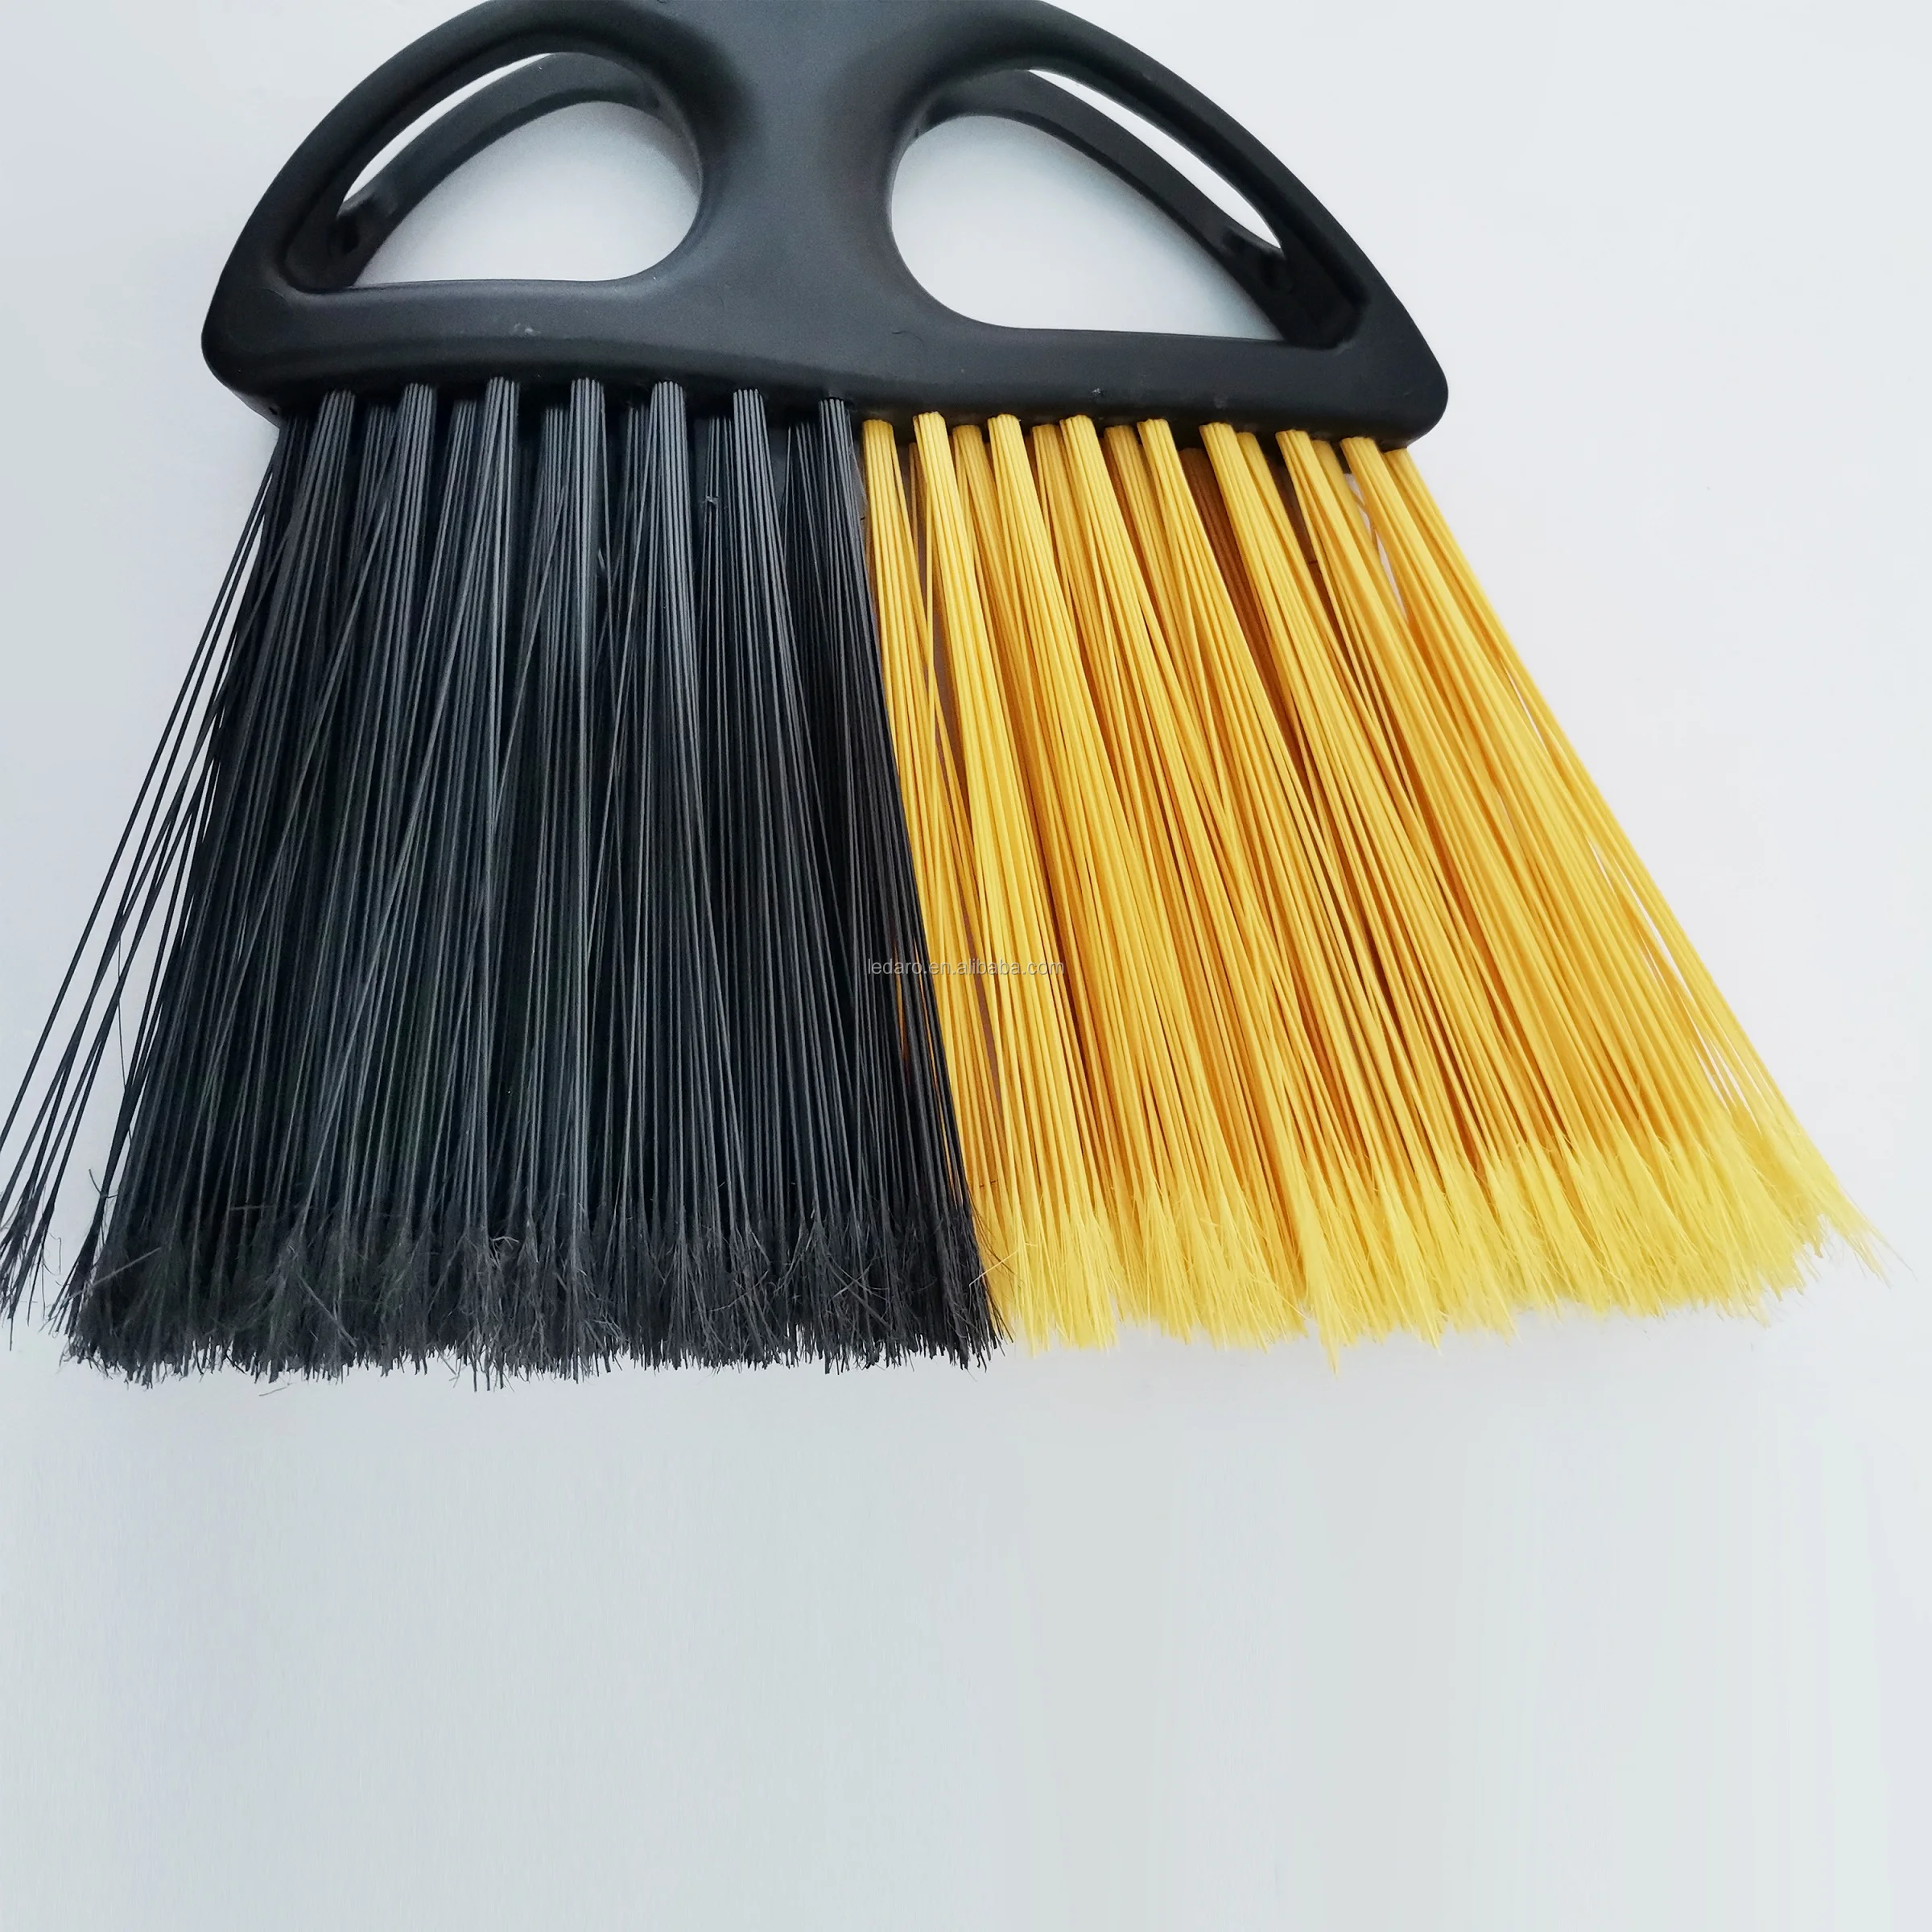 Broom and Dustpan Set, Upright Dust Pan and Broom with Steel Long Handle for Home Kitchen Room Lobby Office Floor Clean